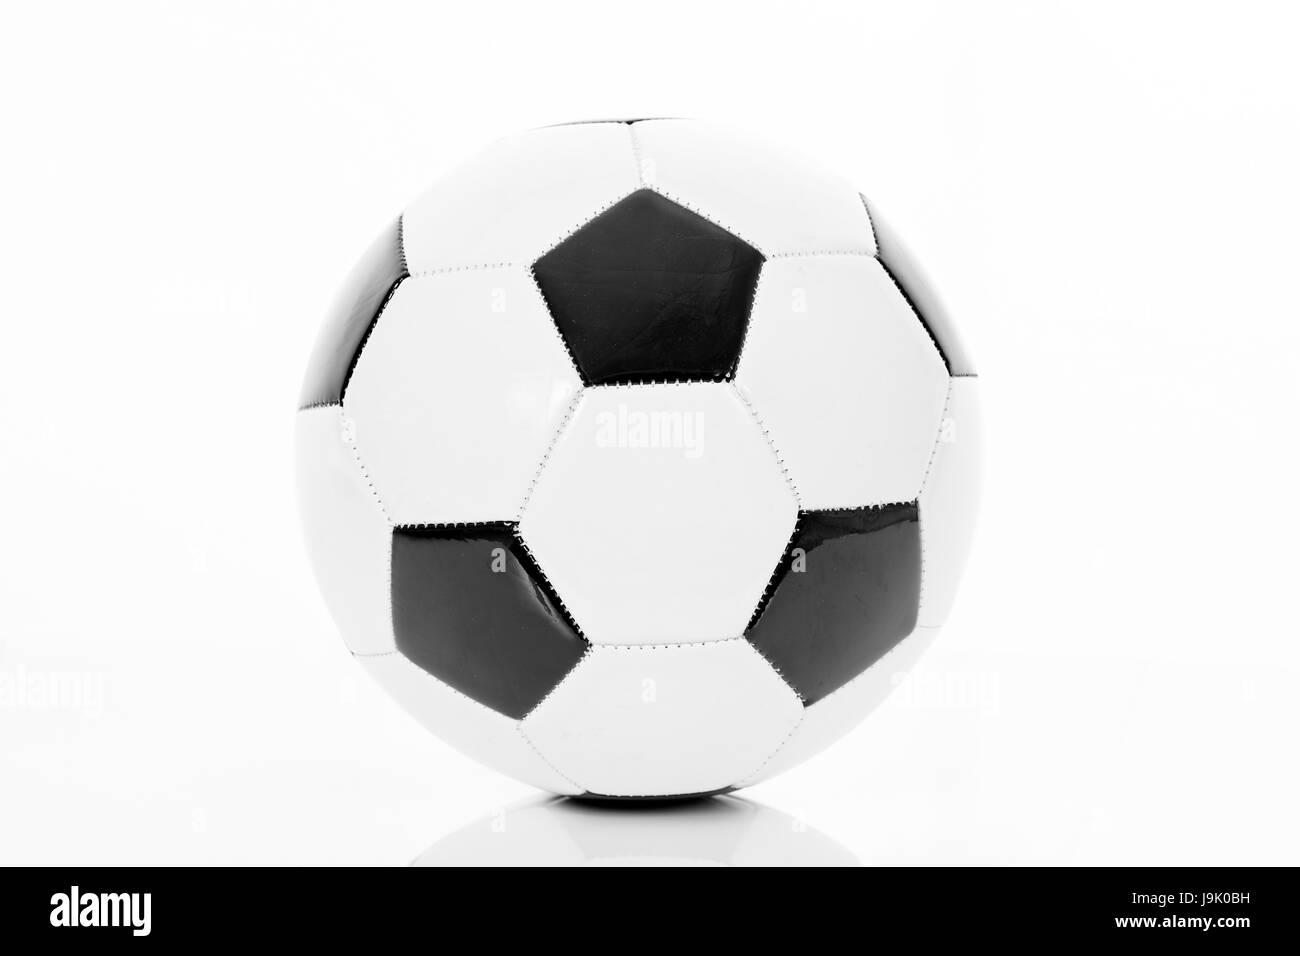 ball, sport, sports, soccer, football, object, single, spare time, free time, Stock Photo